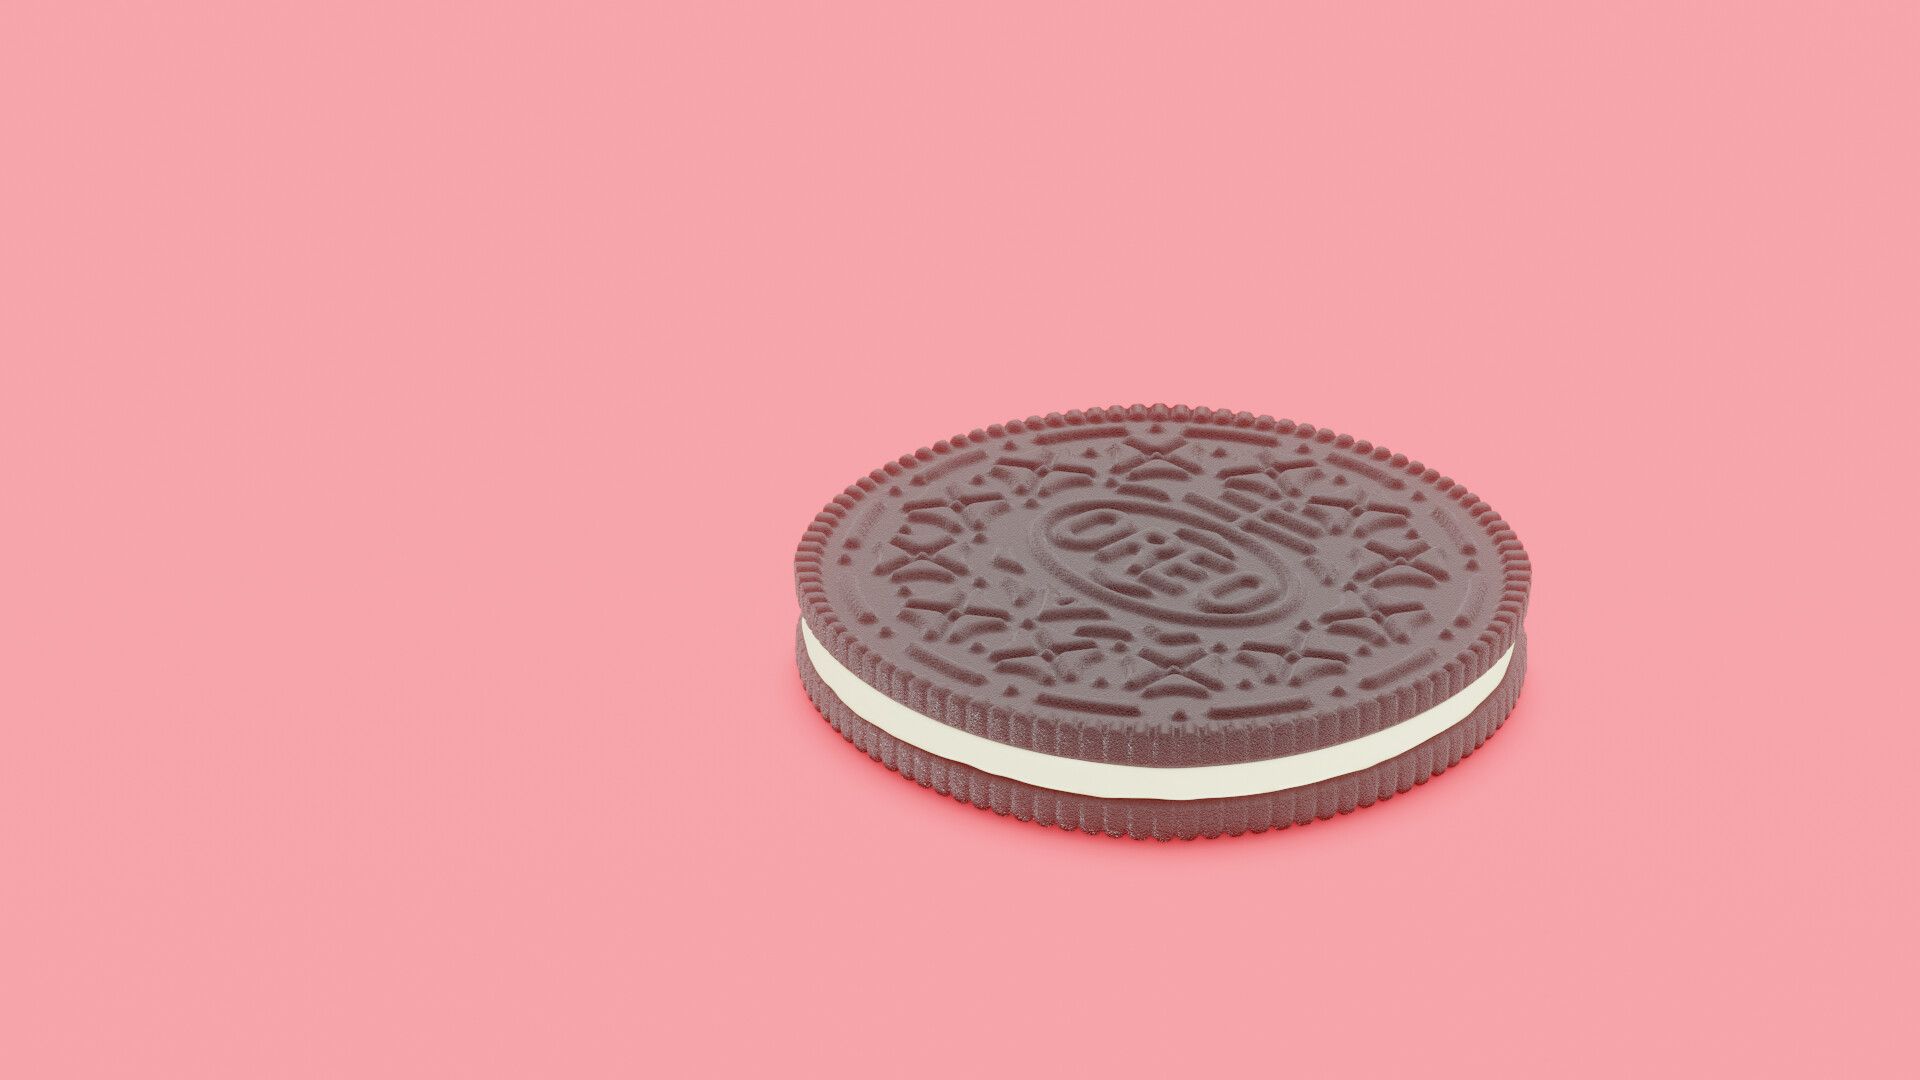 An Oreo cookie on a pink background - Oreo